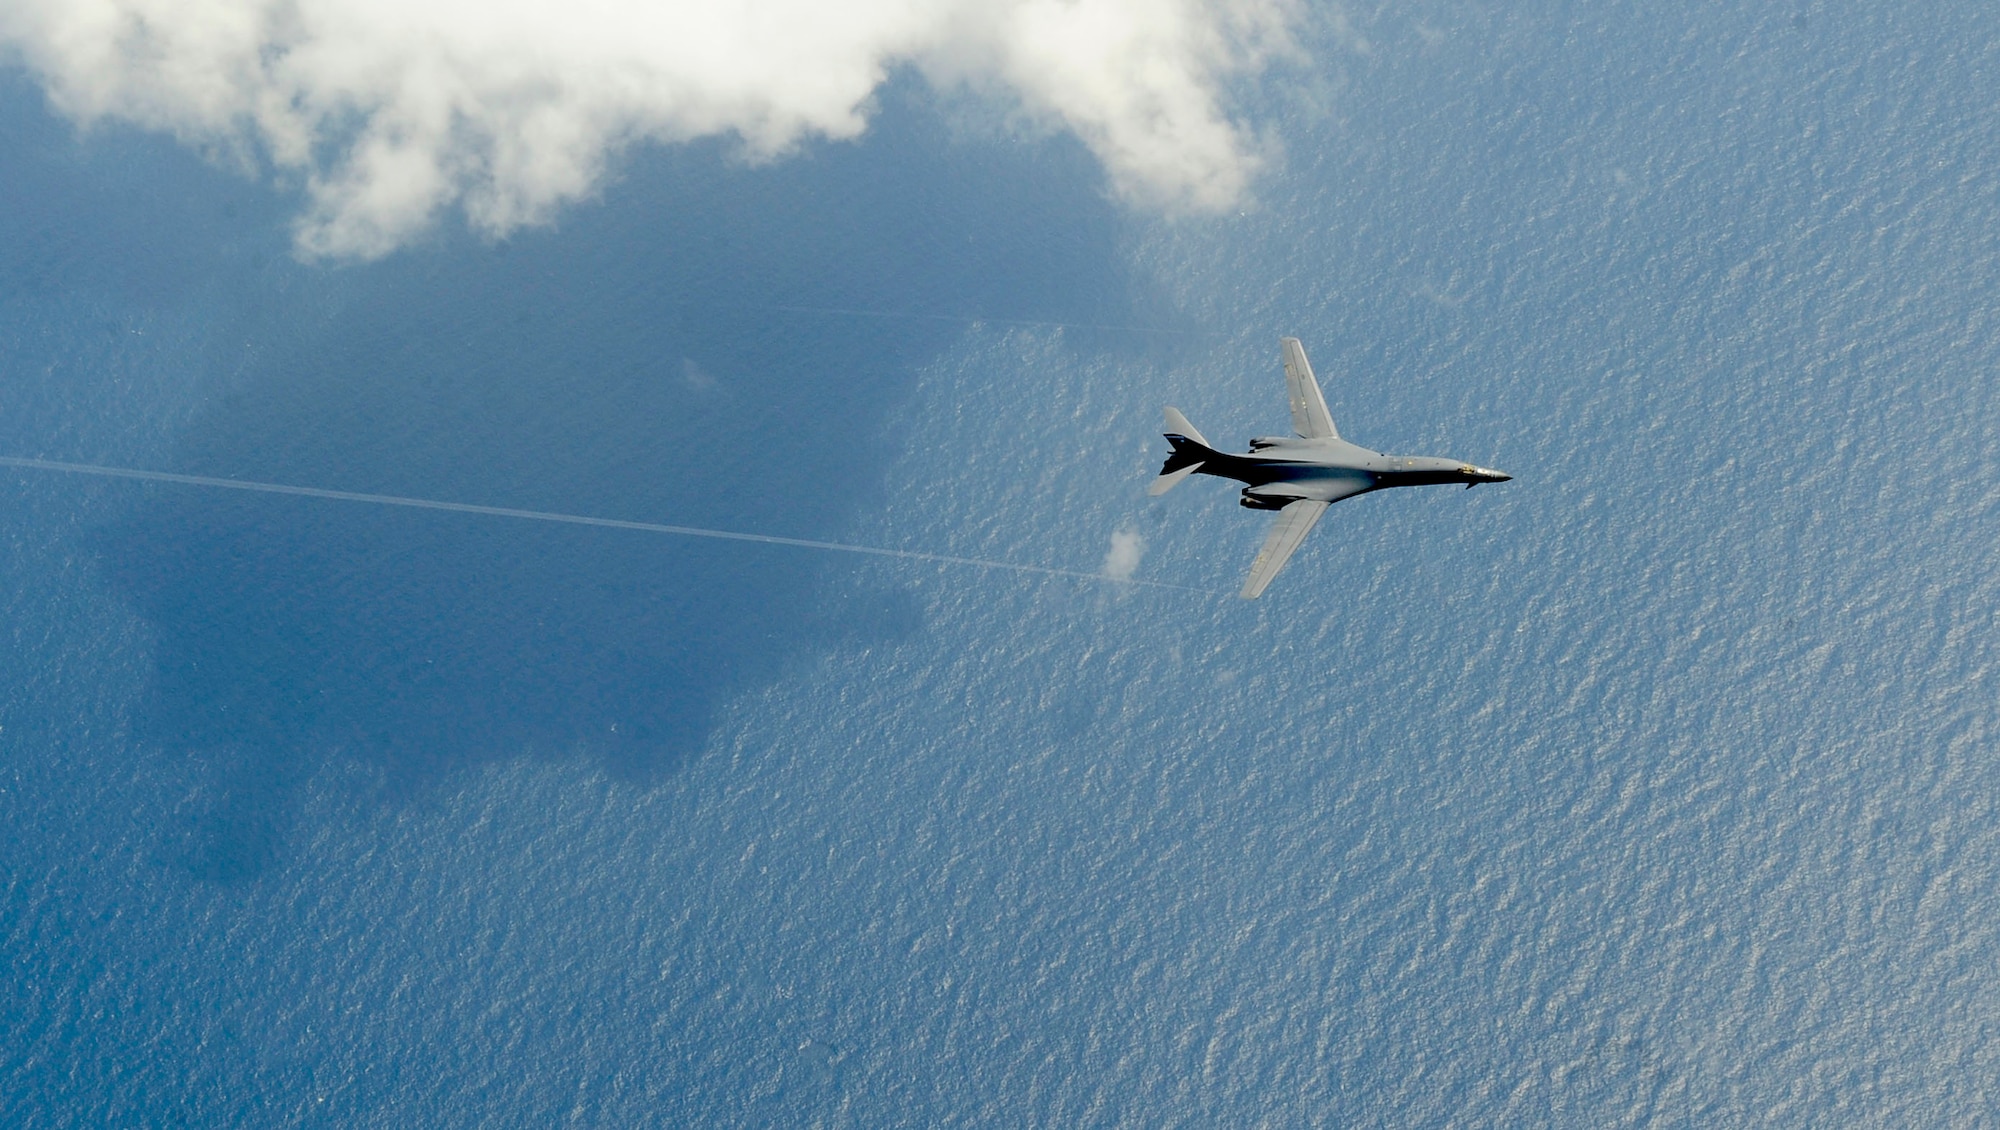 A B-1B Lancer from Dyess Air Force Base, Texas, flies over the Atlantic Ocean before refueling from a KC-135 assigned to the 100th Air Refueling Wing, Royal Air Force Mildenhall, England, July 31, 2012. The B-1, commonly referred to as the “Bone,” is exceptionally versatile and has a synthetic aperture radar that is capable of tracking, targeting and engaging moving vehicles as well as self-targeting and terrain-following modules. (U.S. Air Force photo/Senior Airman Ethan Morgan)